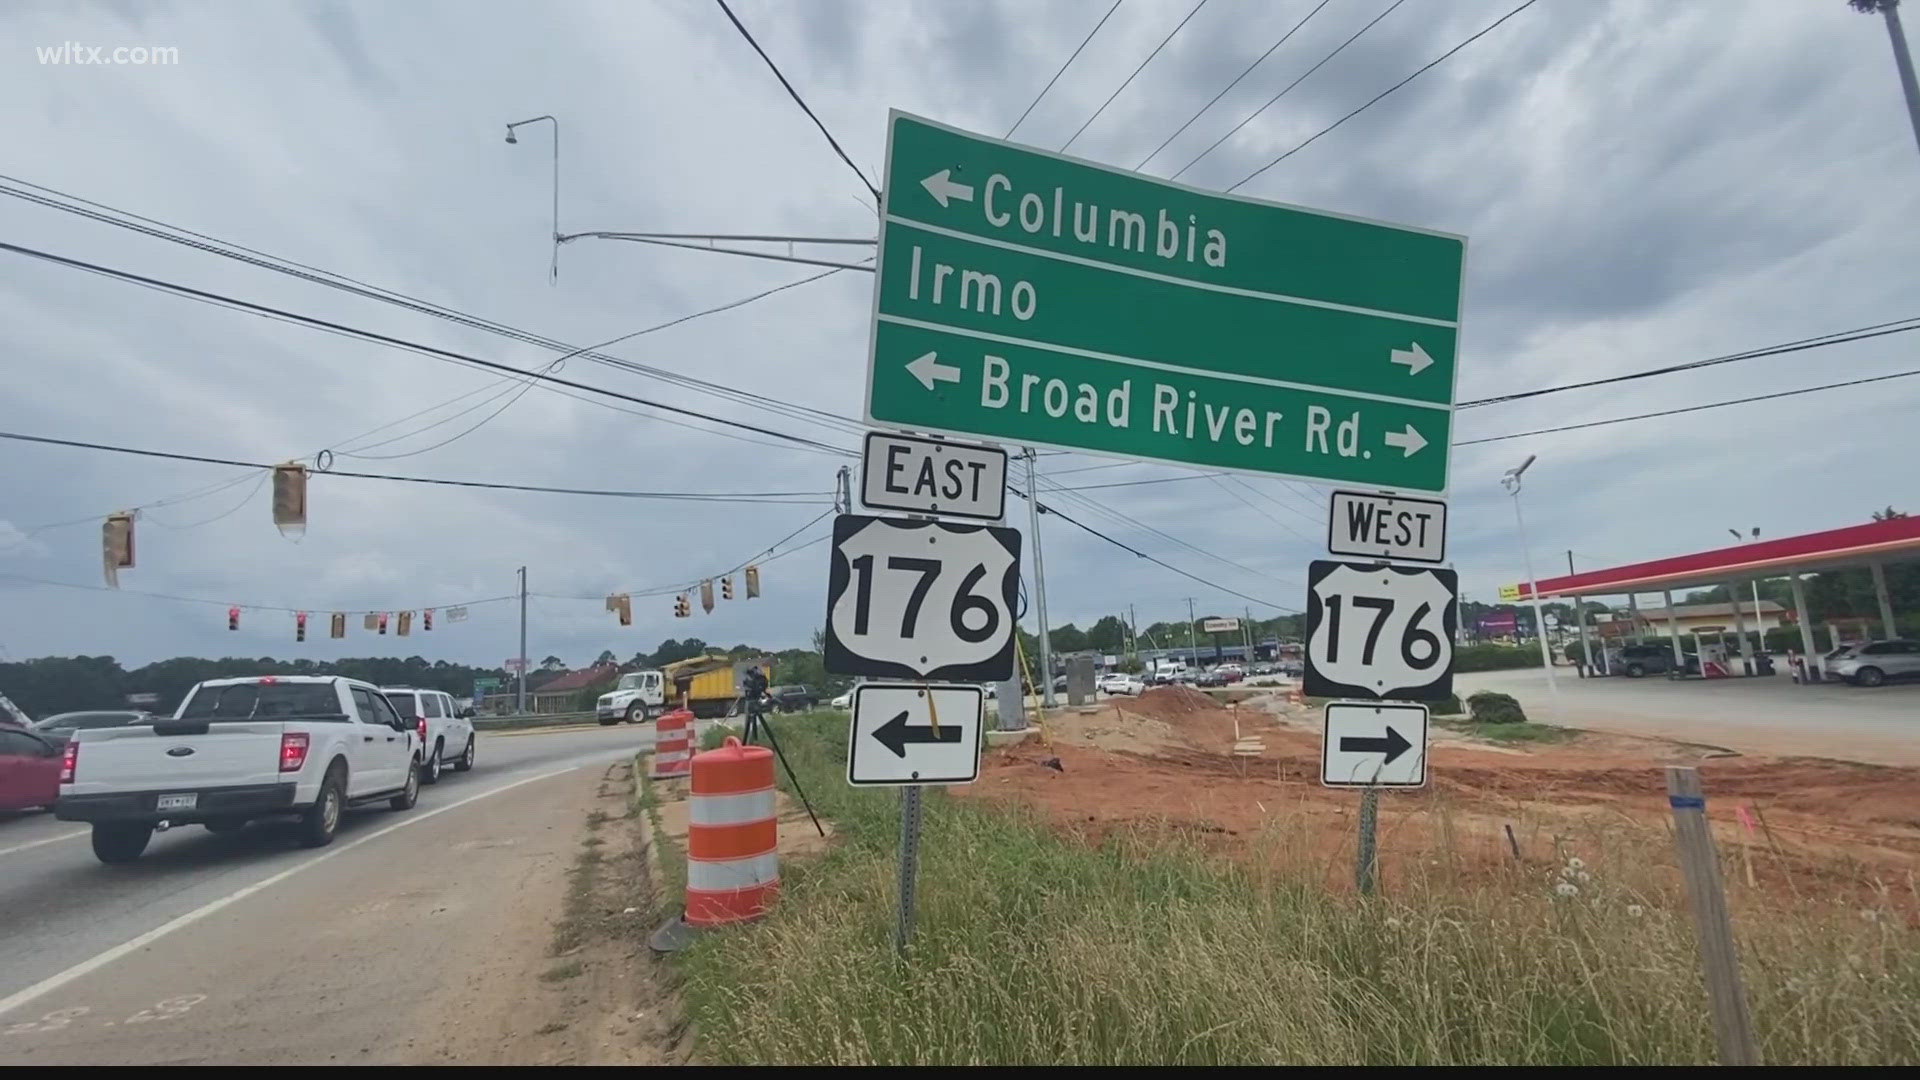 Drivers traveling on Broad River Road now have a new route.